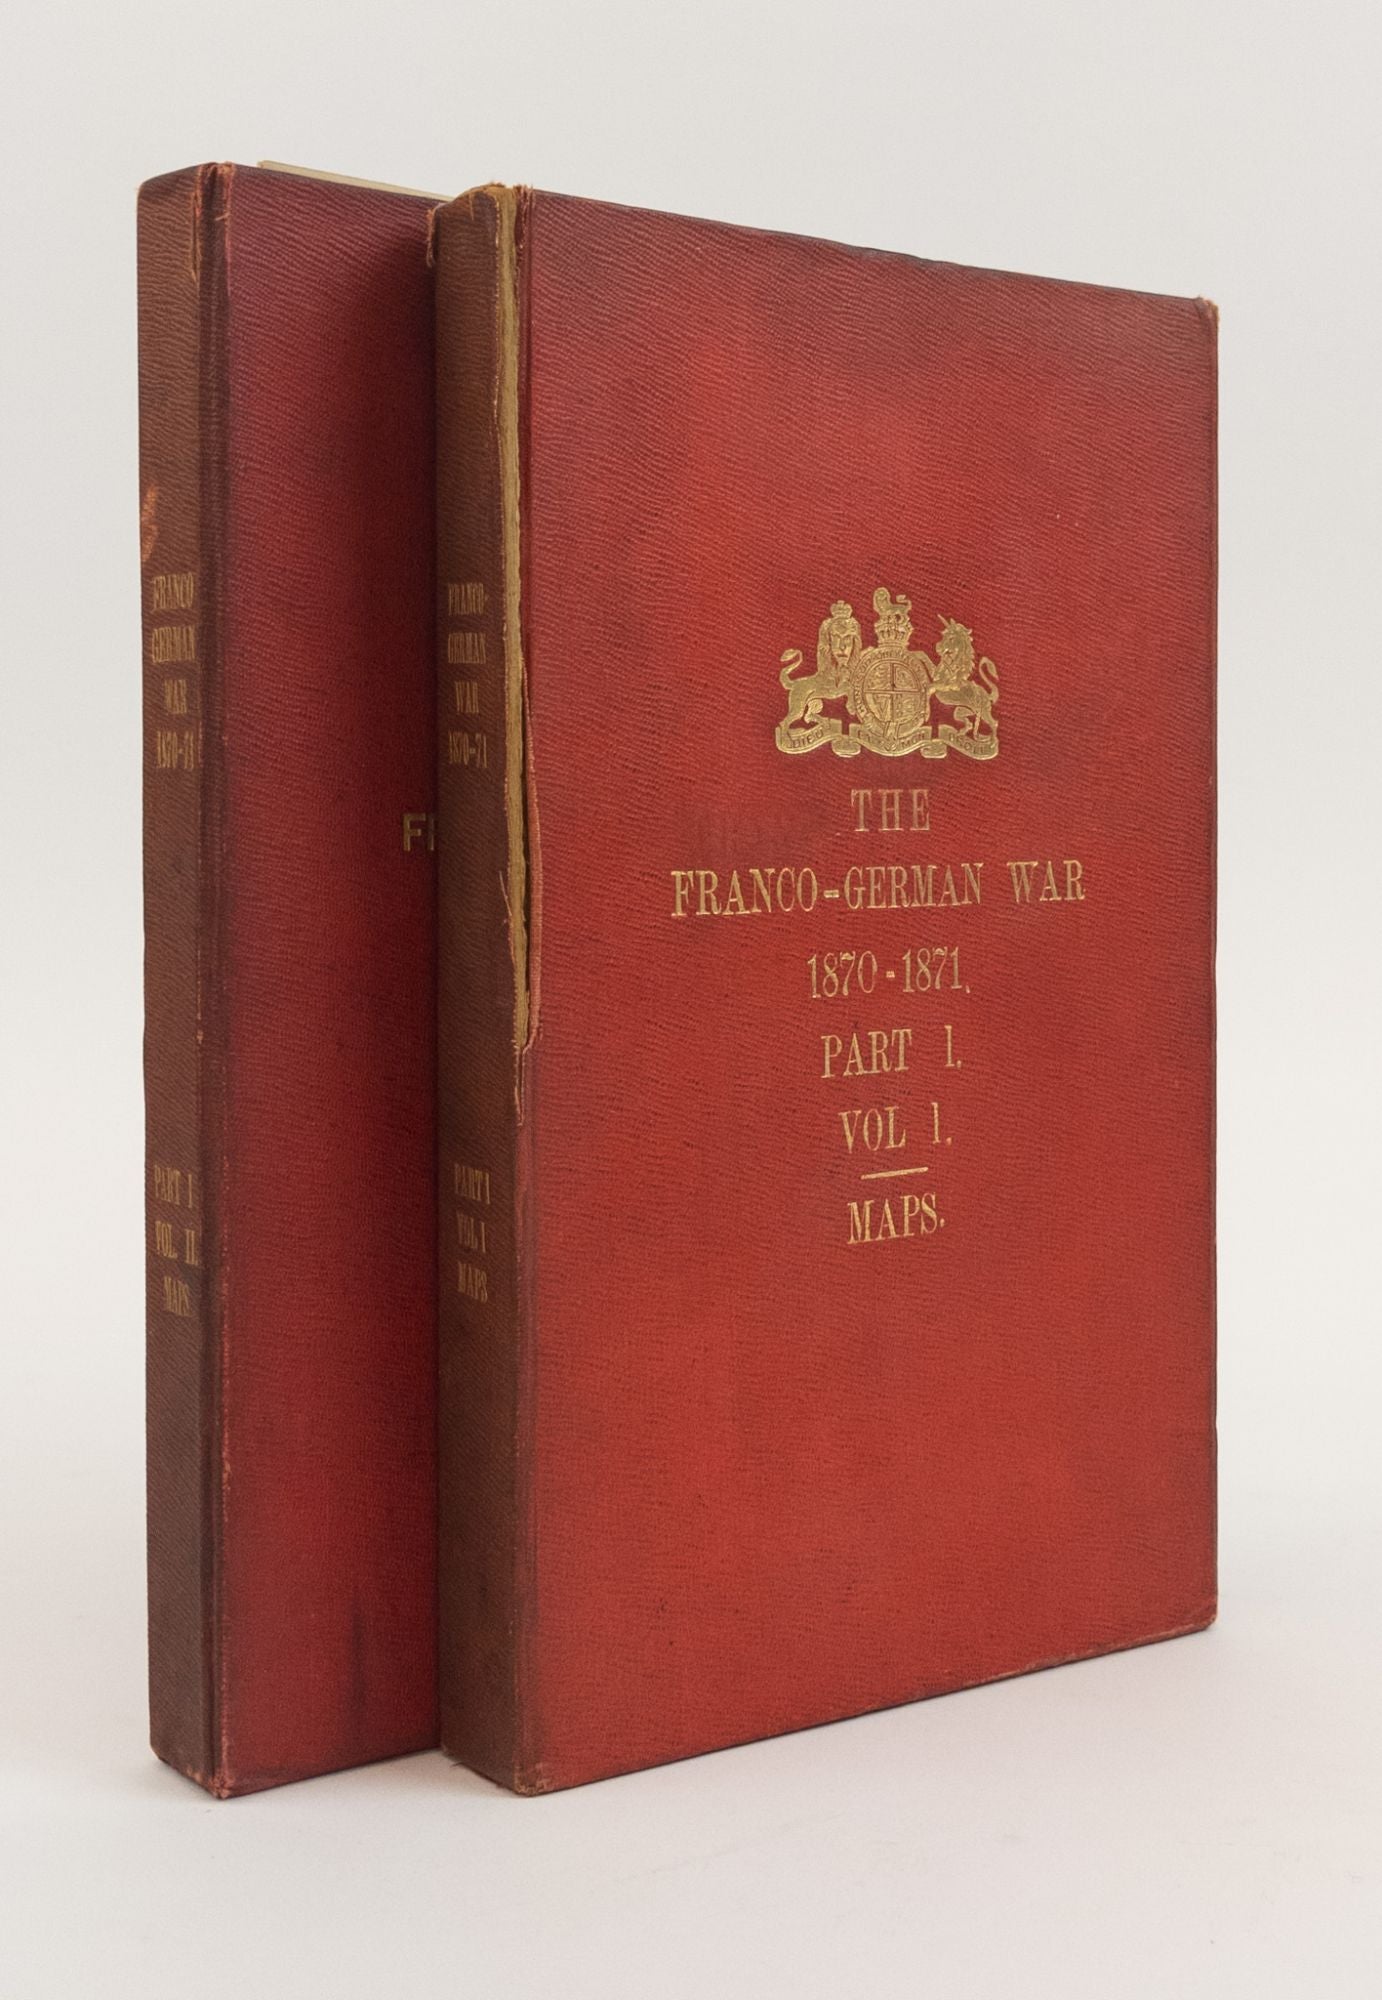 Product Image for THE FRANCO-GERMAN WAR 1870-1871, PART 1 VOL 1 & 2 MAPS. [2 Volumes]